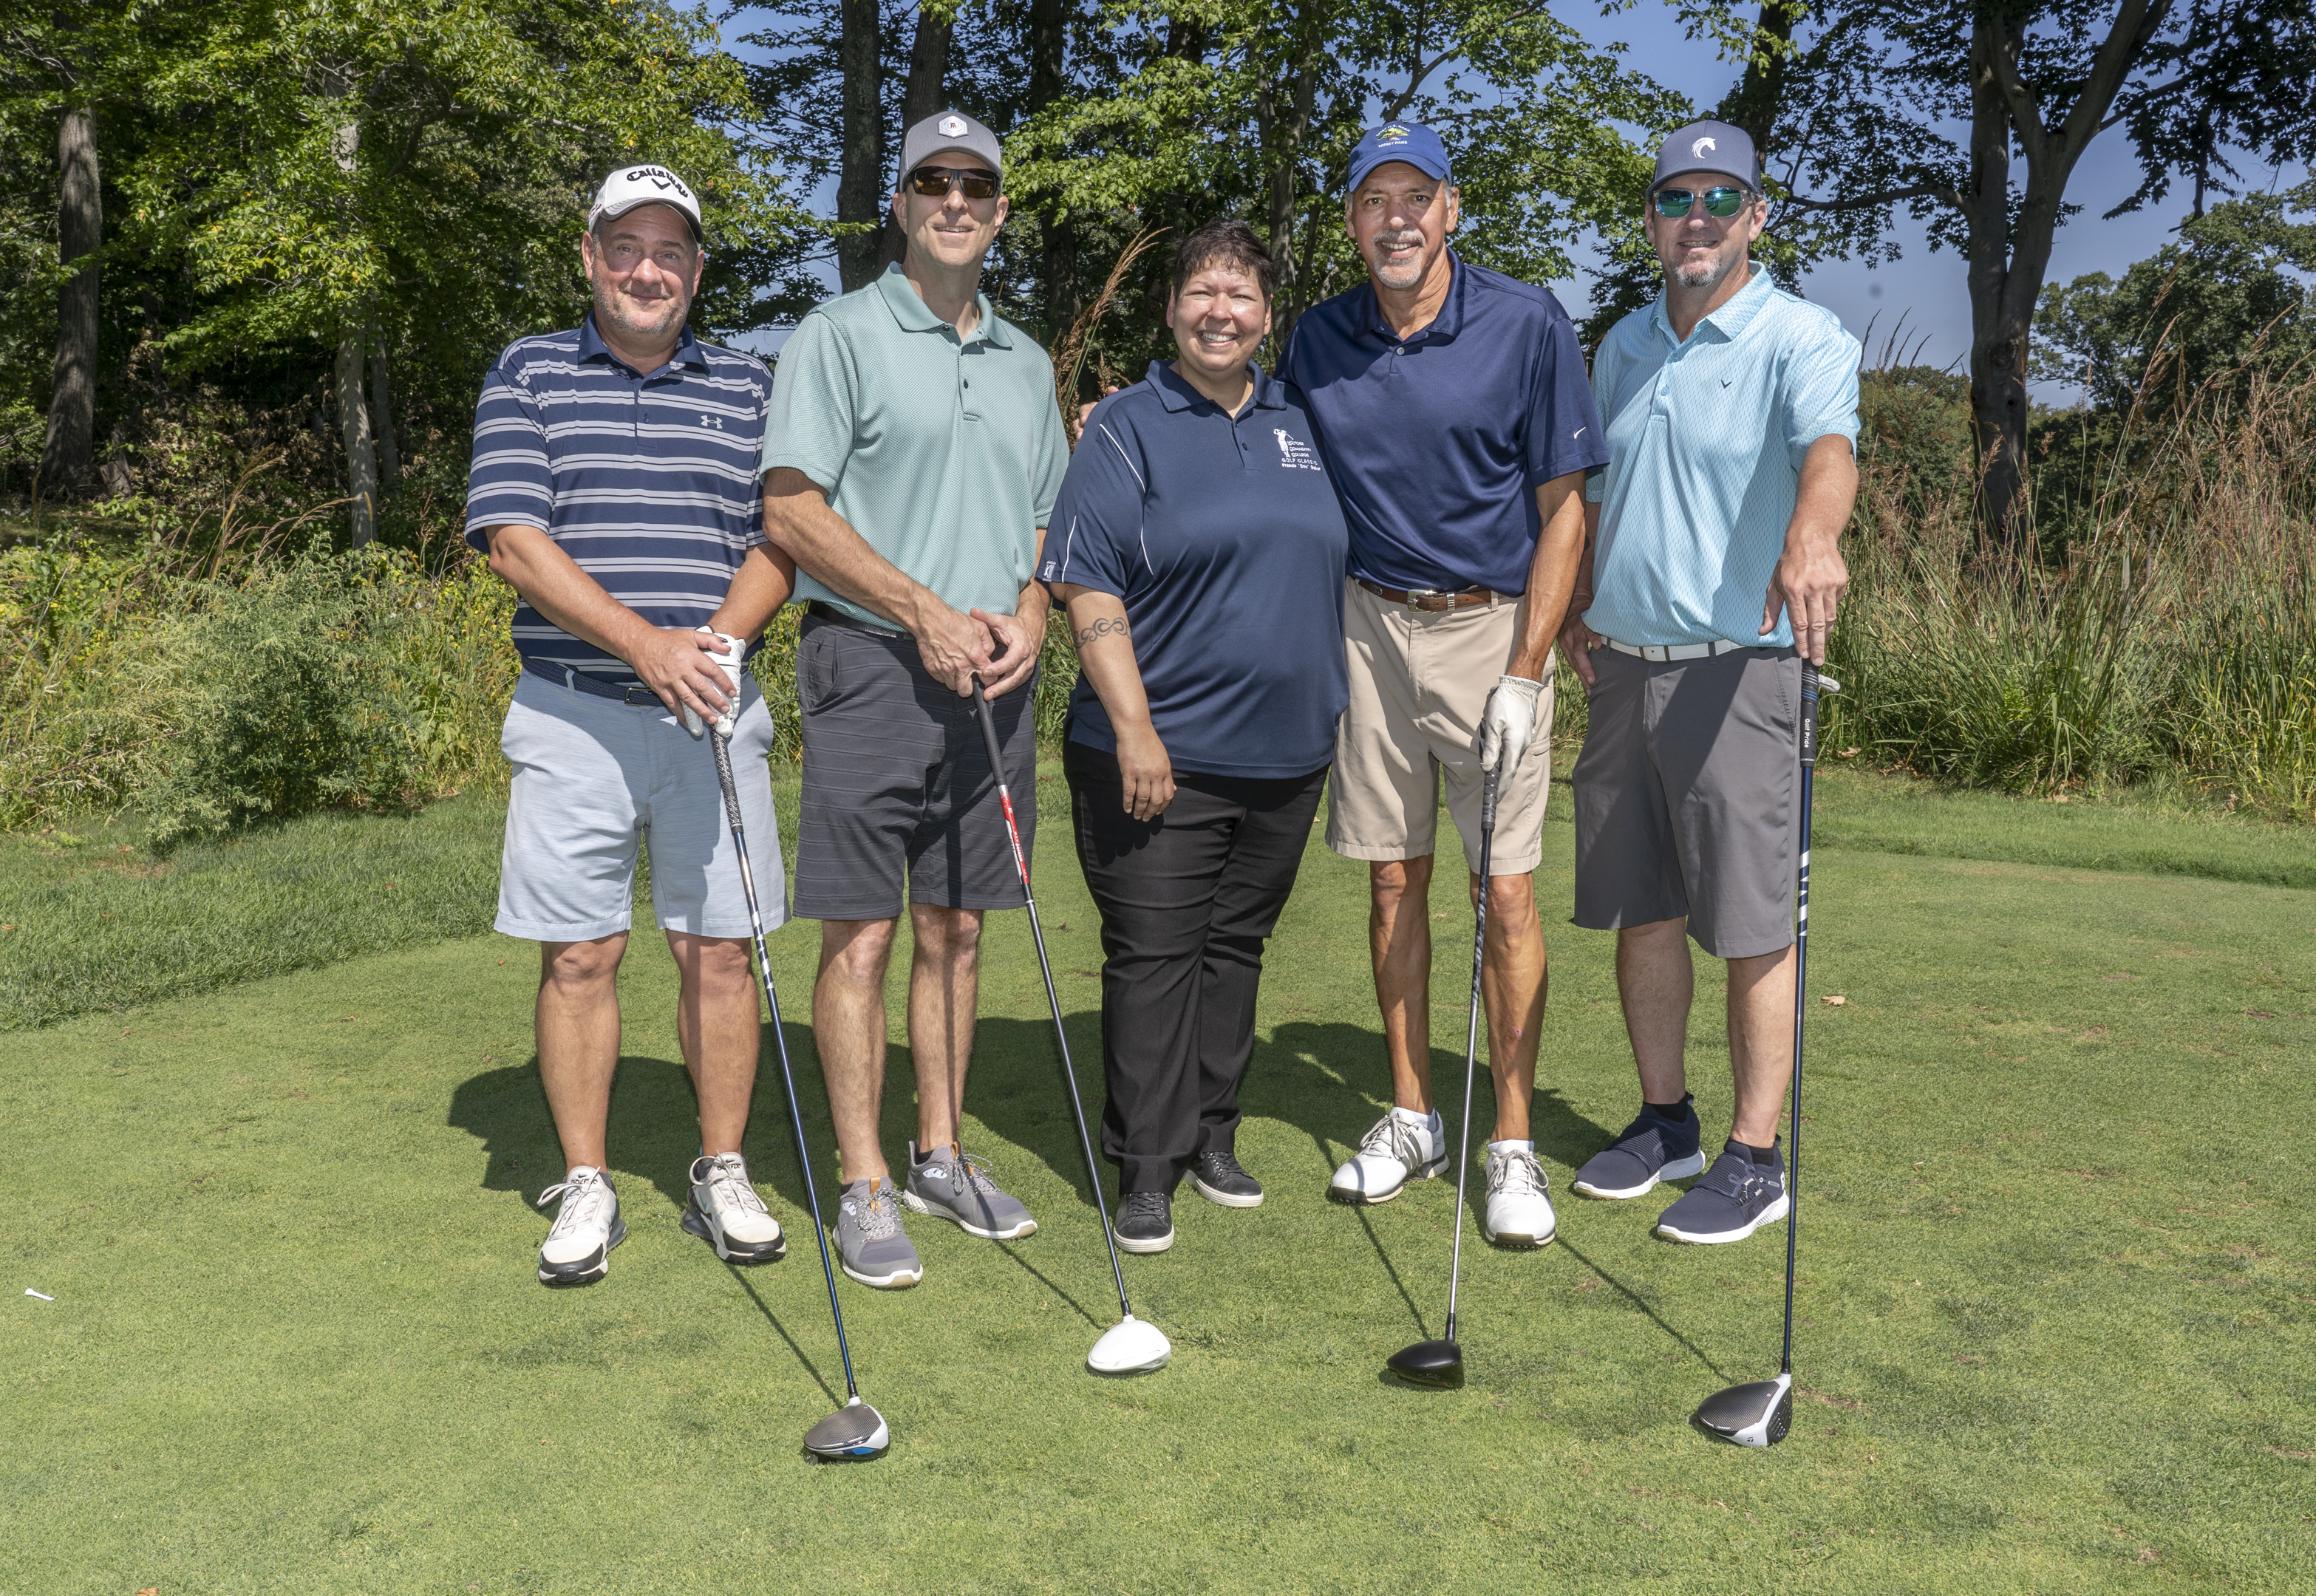 Christina Royal poses with golfers on a course